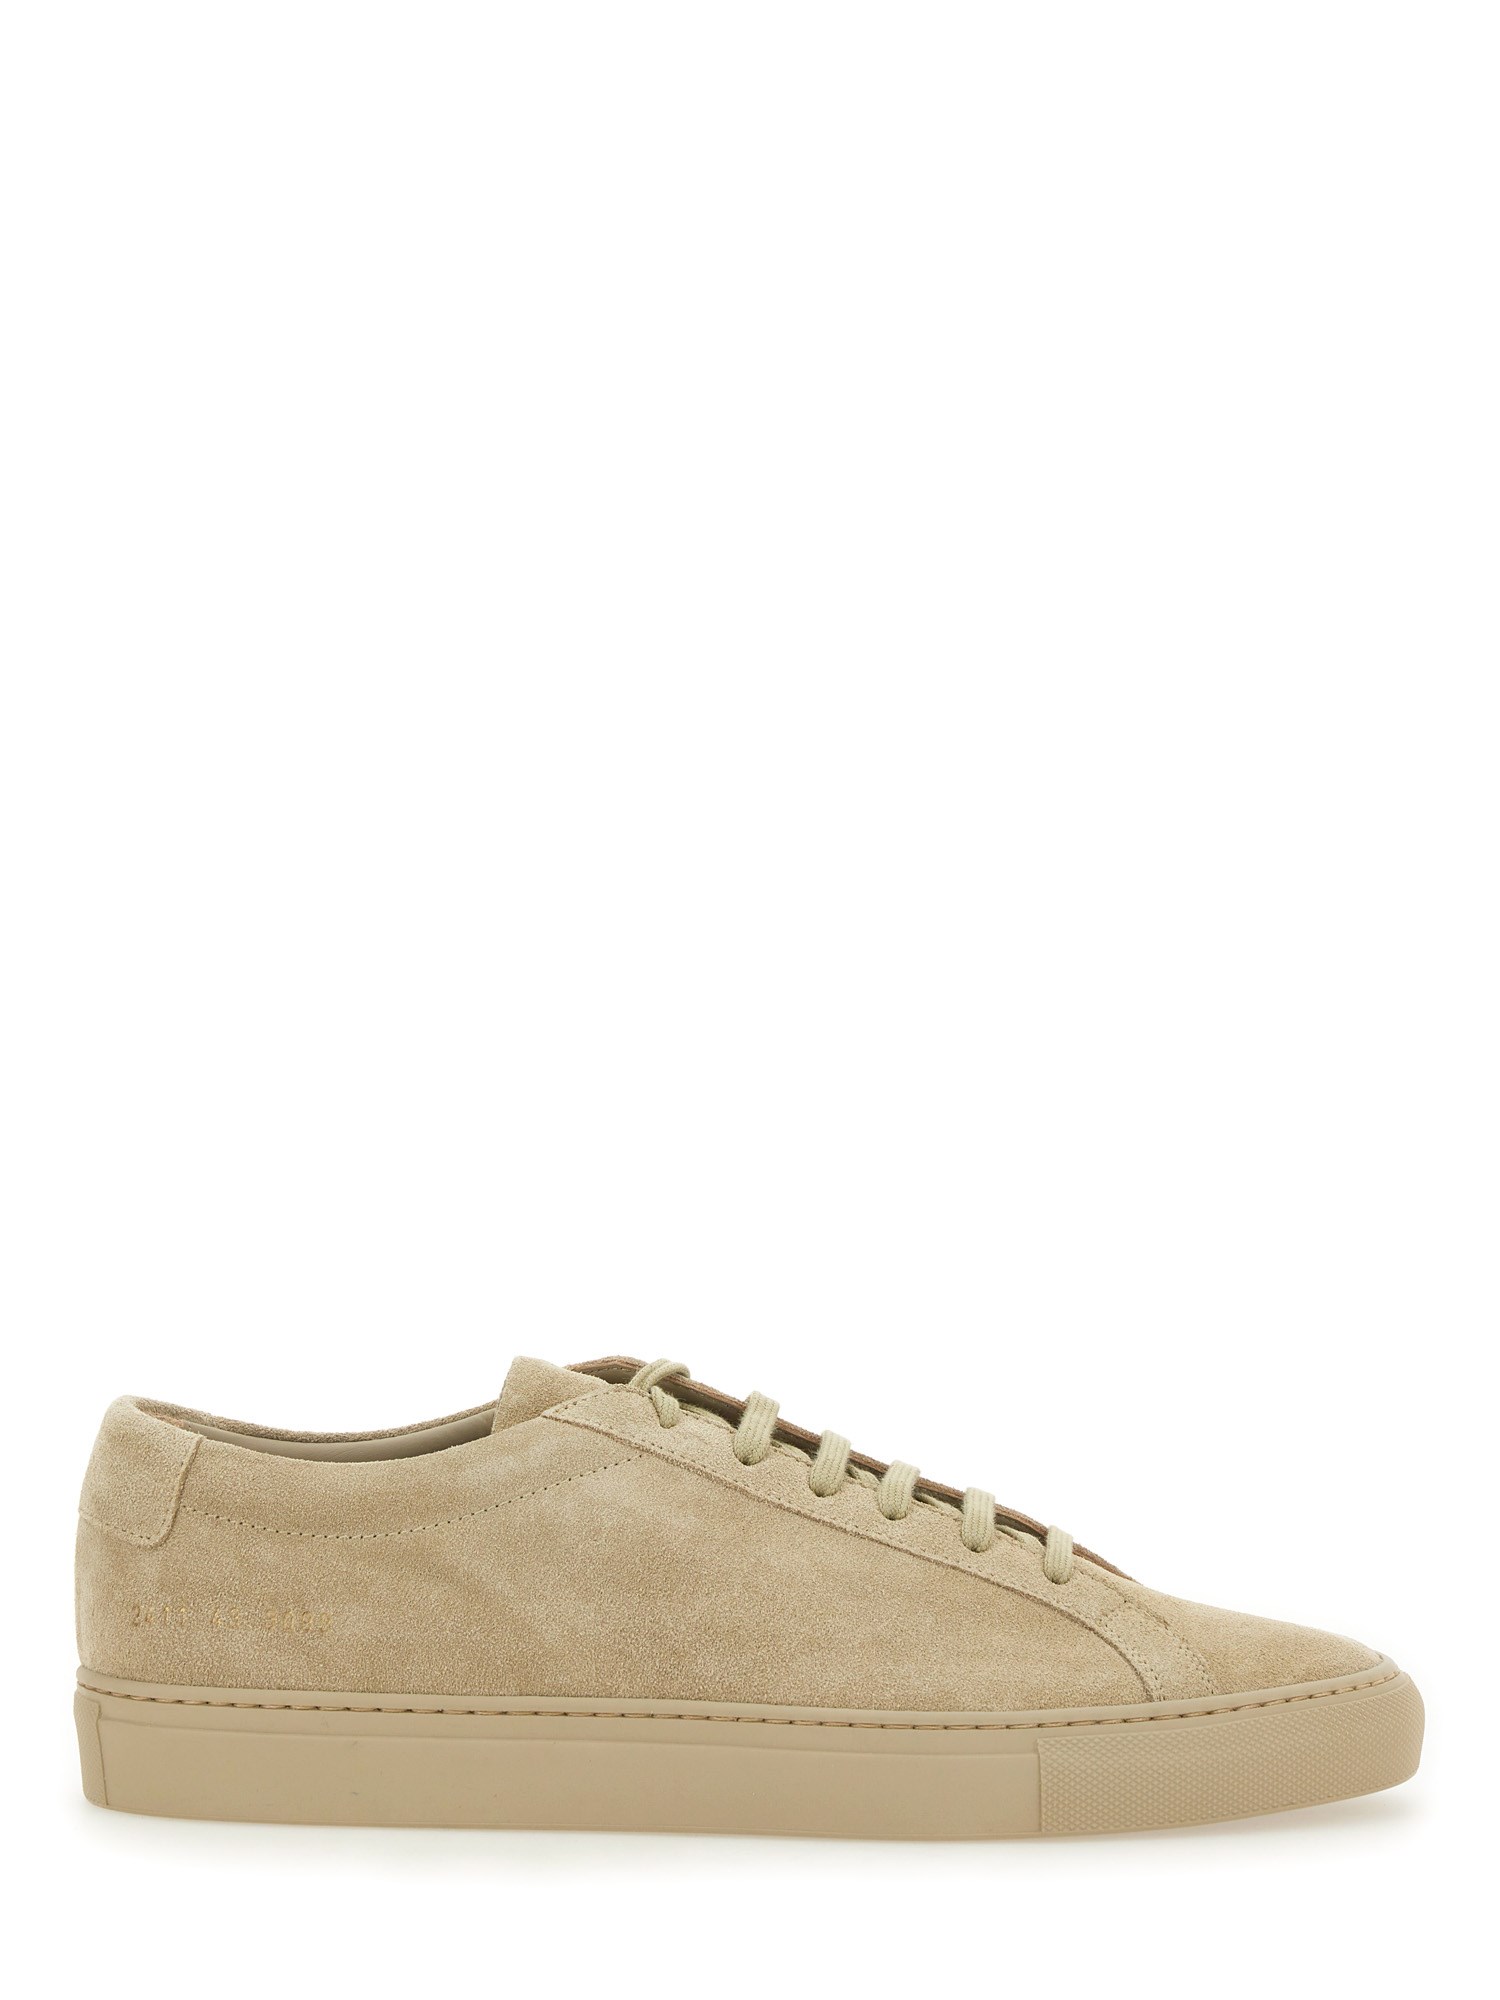 COMMON PROJECTS common projects leather sneaker